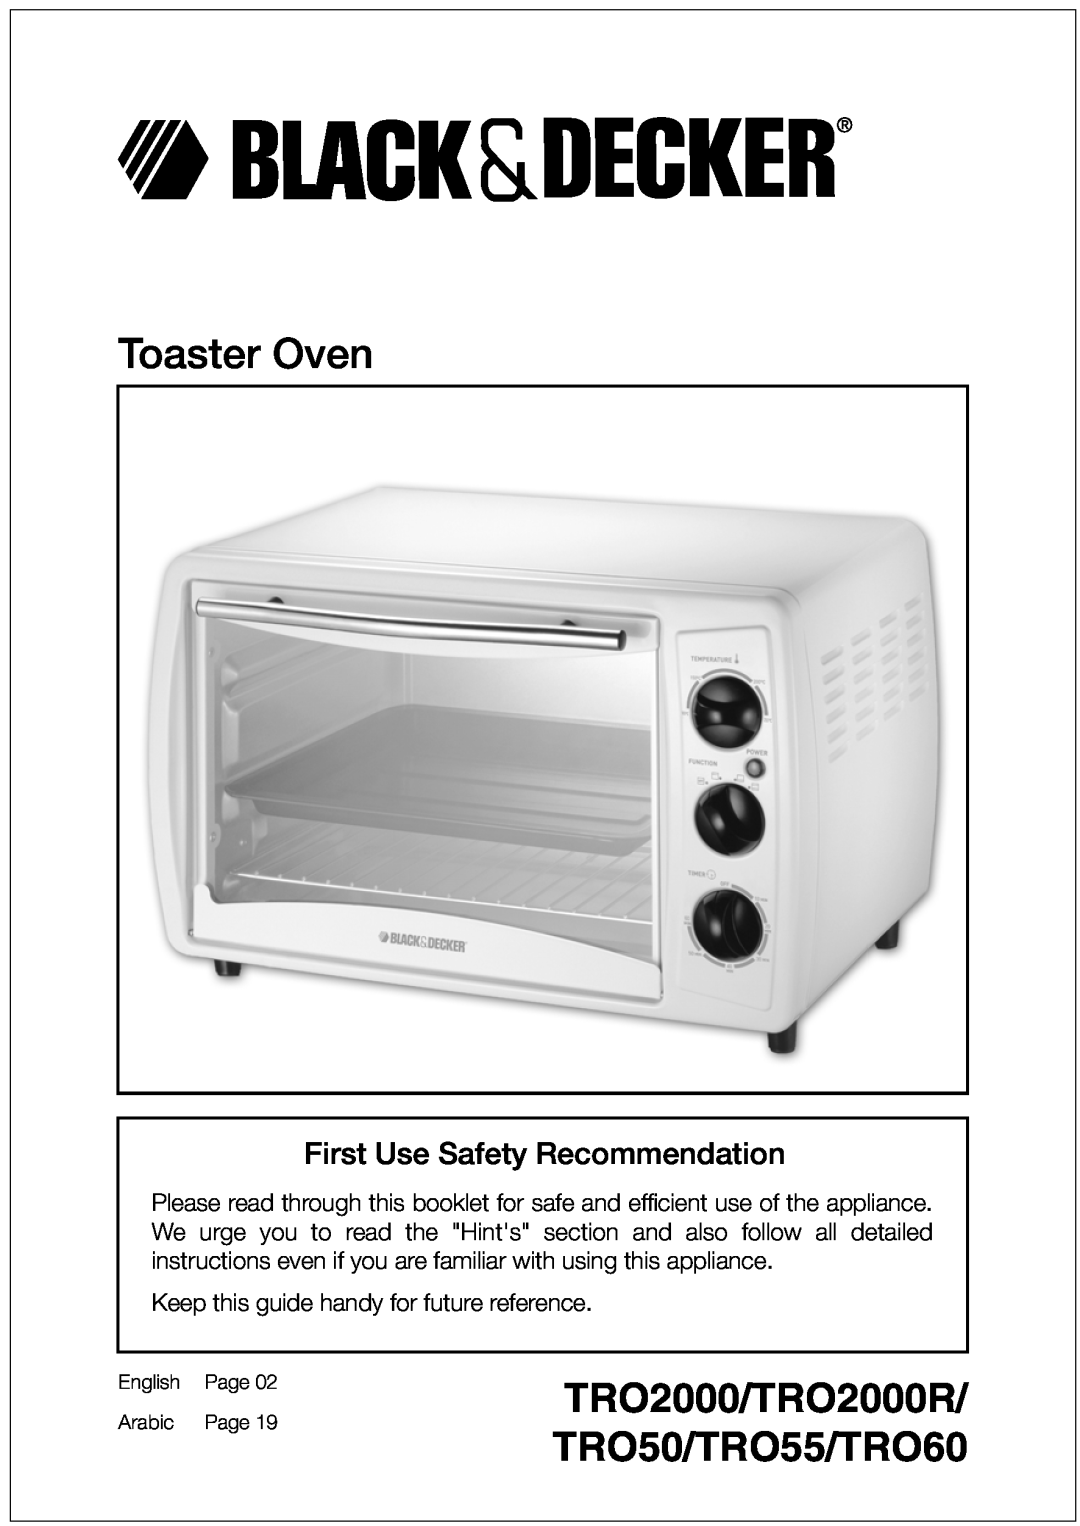 Black & Decker manual First Use Safety Recommendation, Toaster Oven, TRO2000/TRO2000R TRO50/TRO55/TRO60, English, Page 